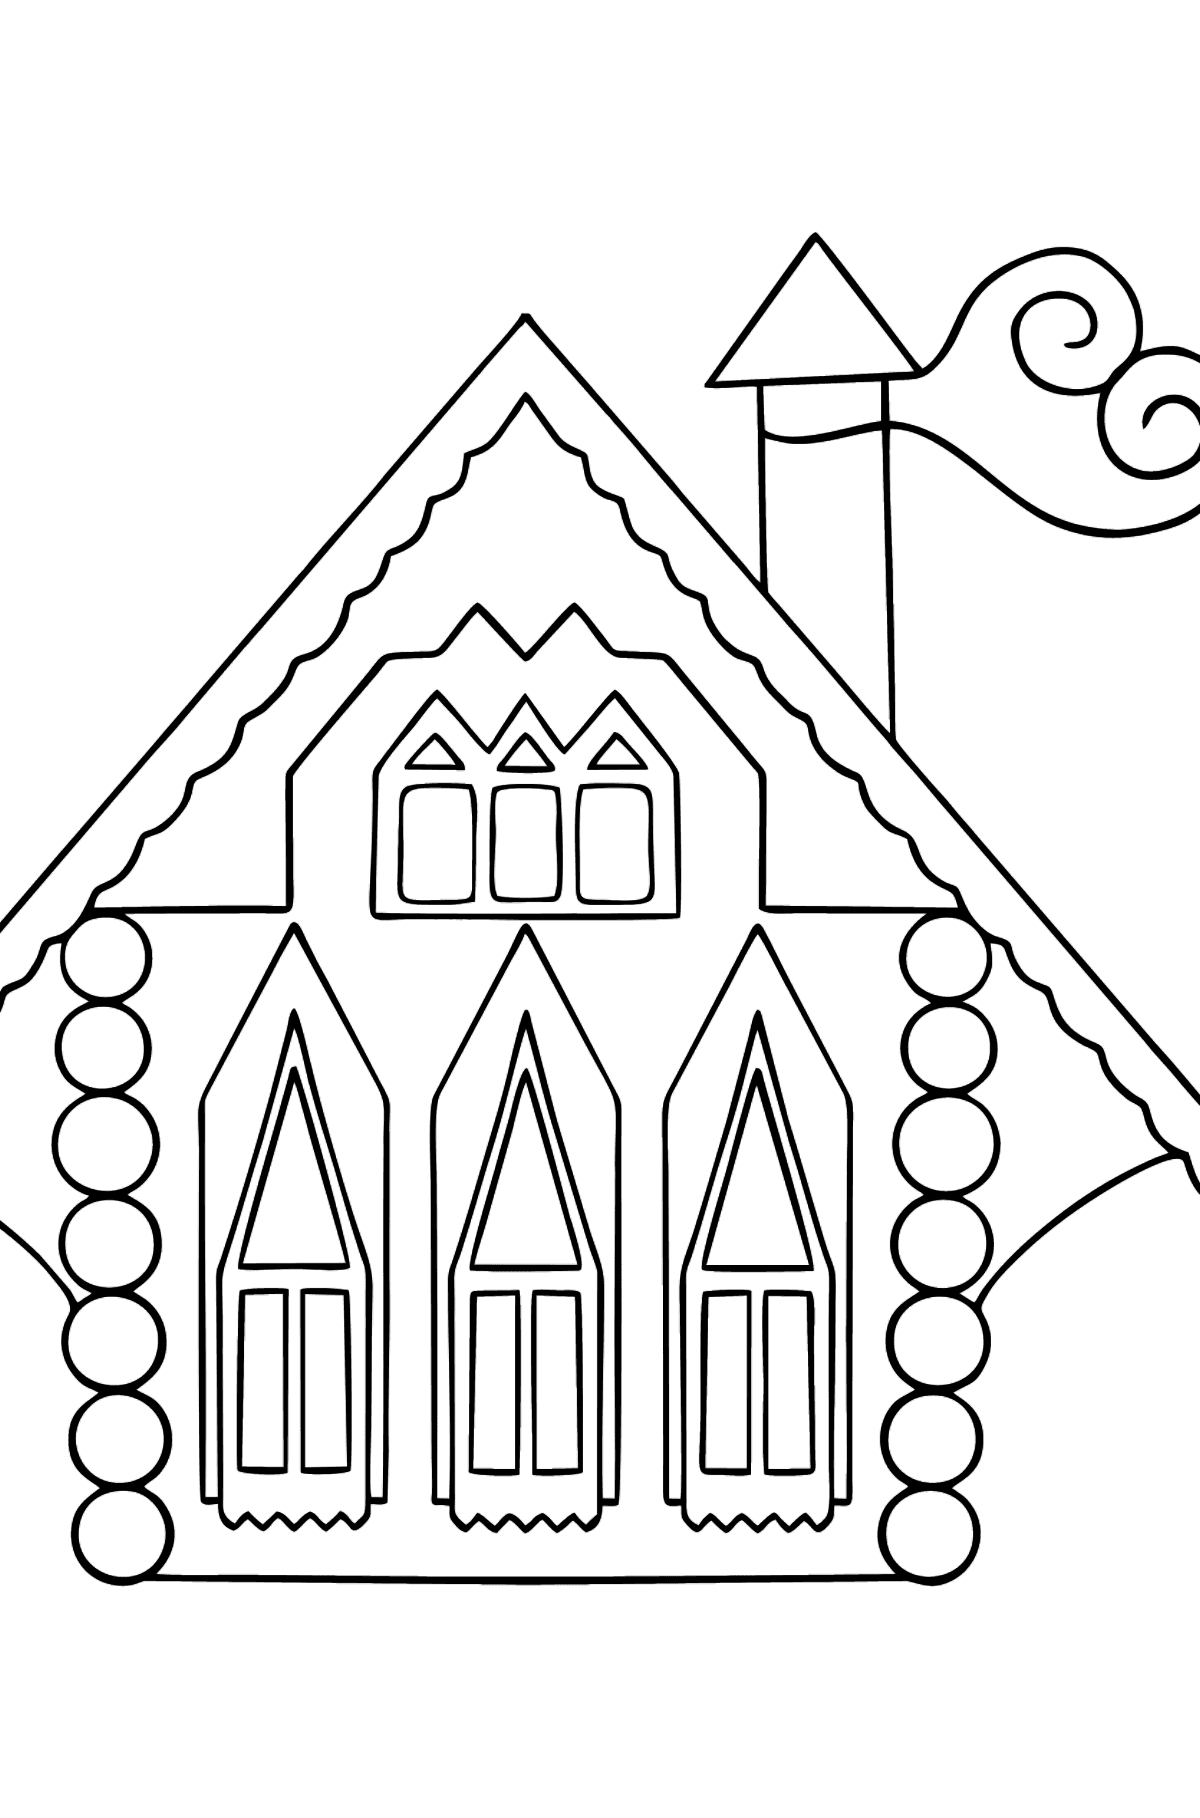 Rainbow House Coloring Page difficult ♥ Online and Print for Free